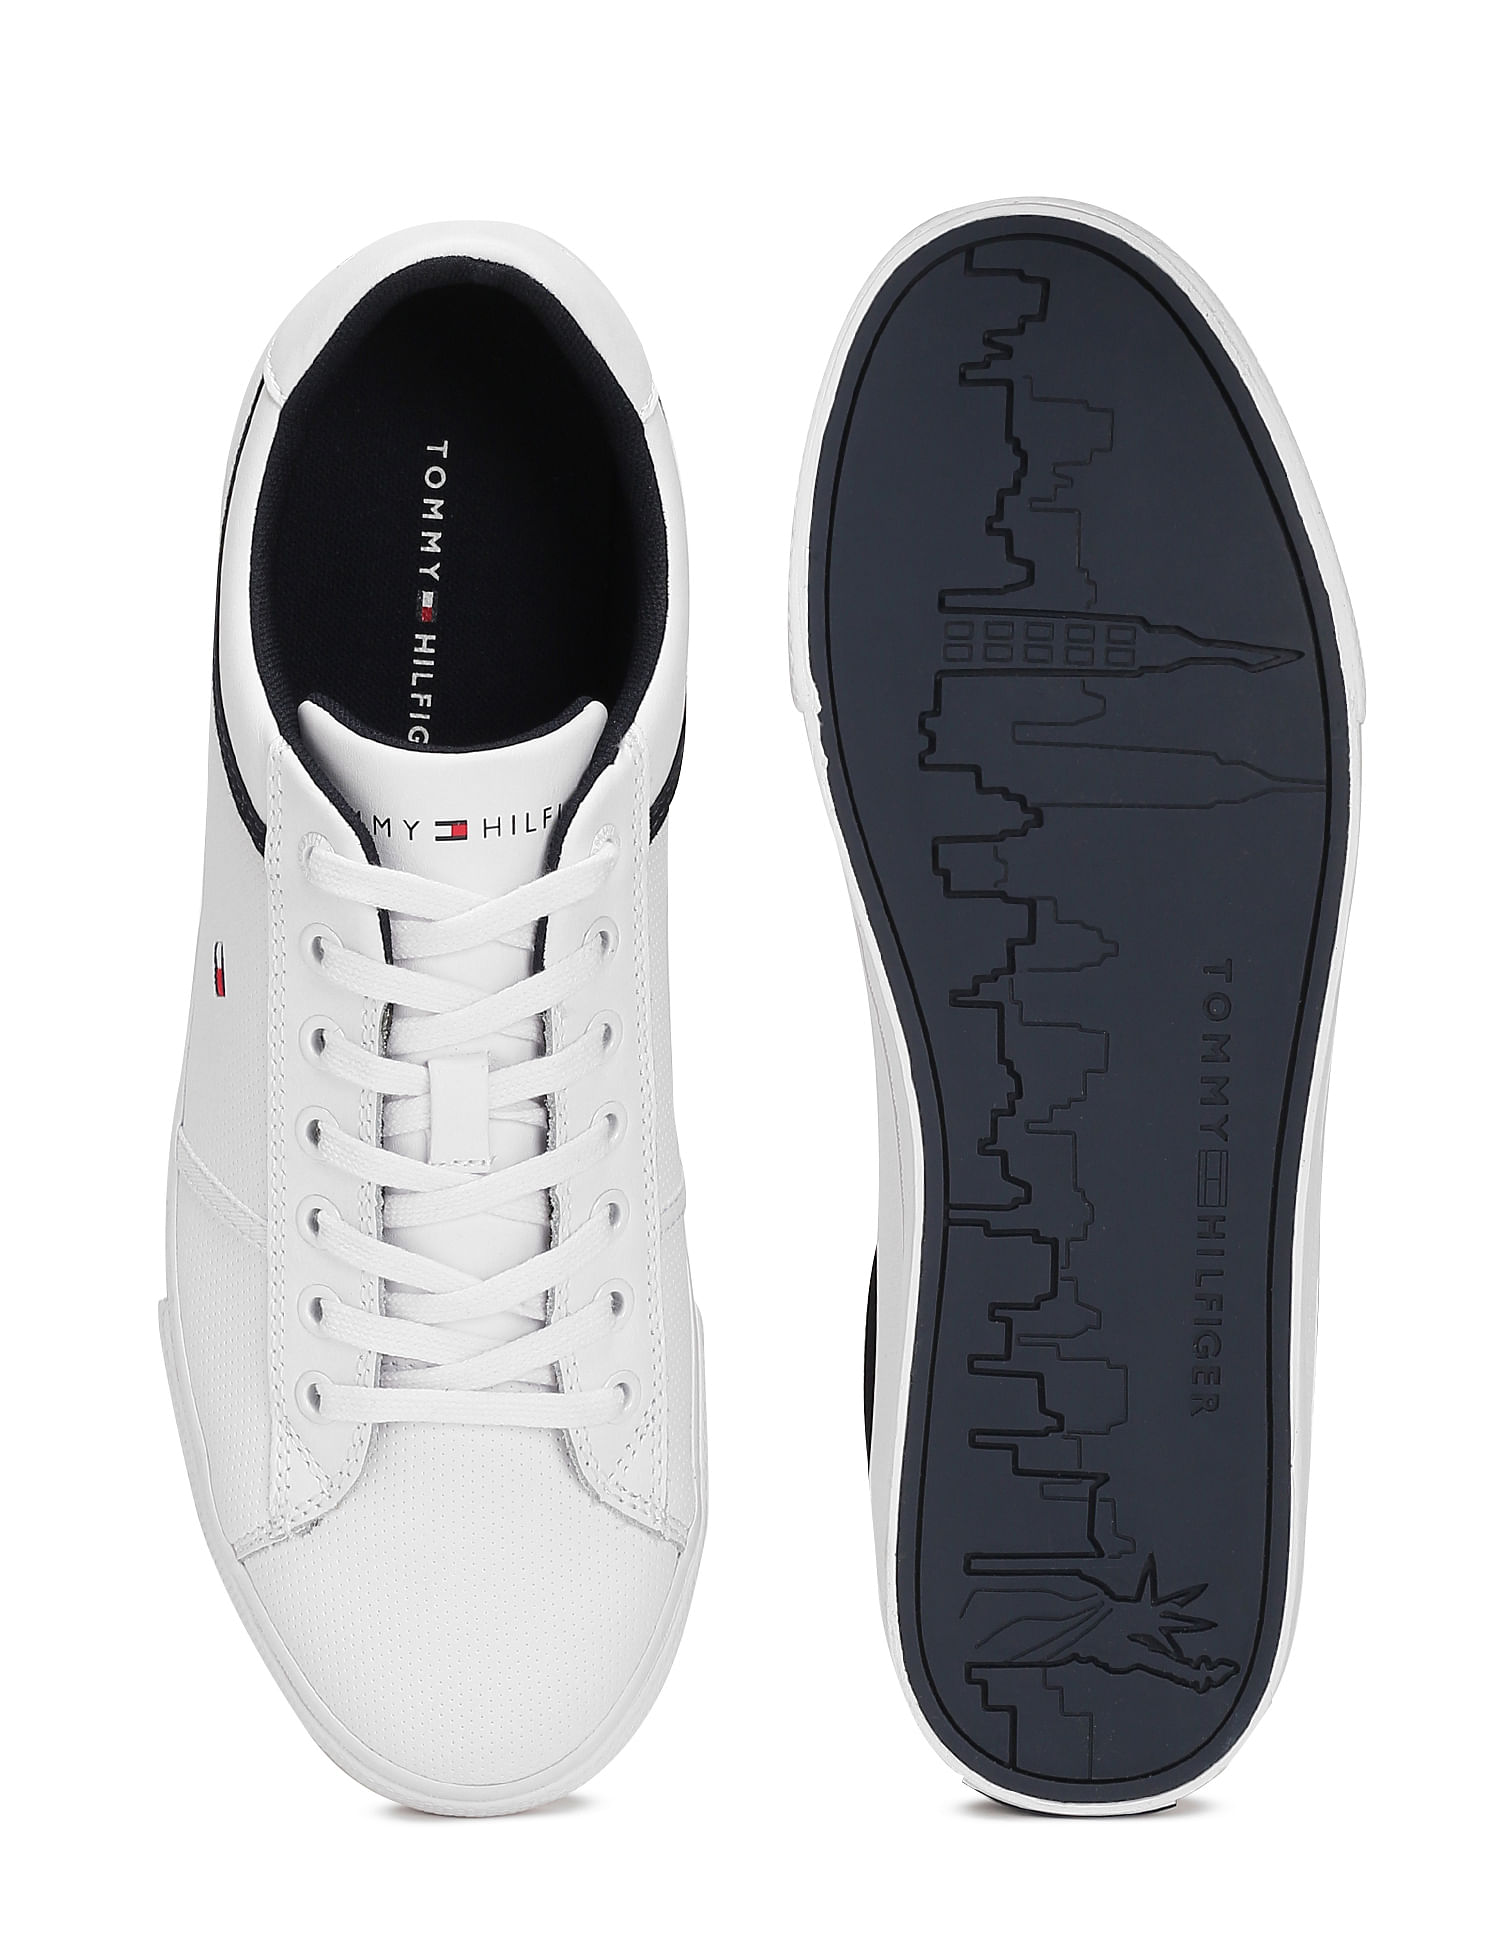 Share 249+ iconic white sneakers latest